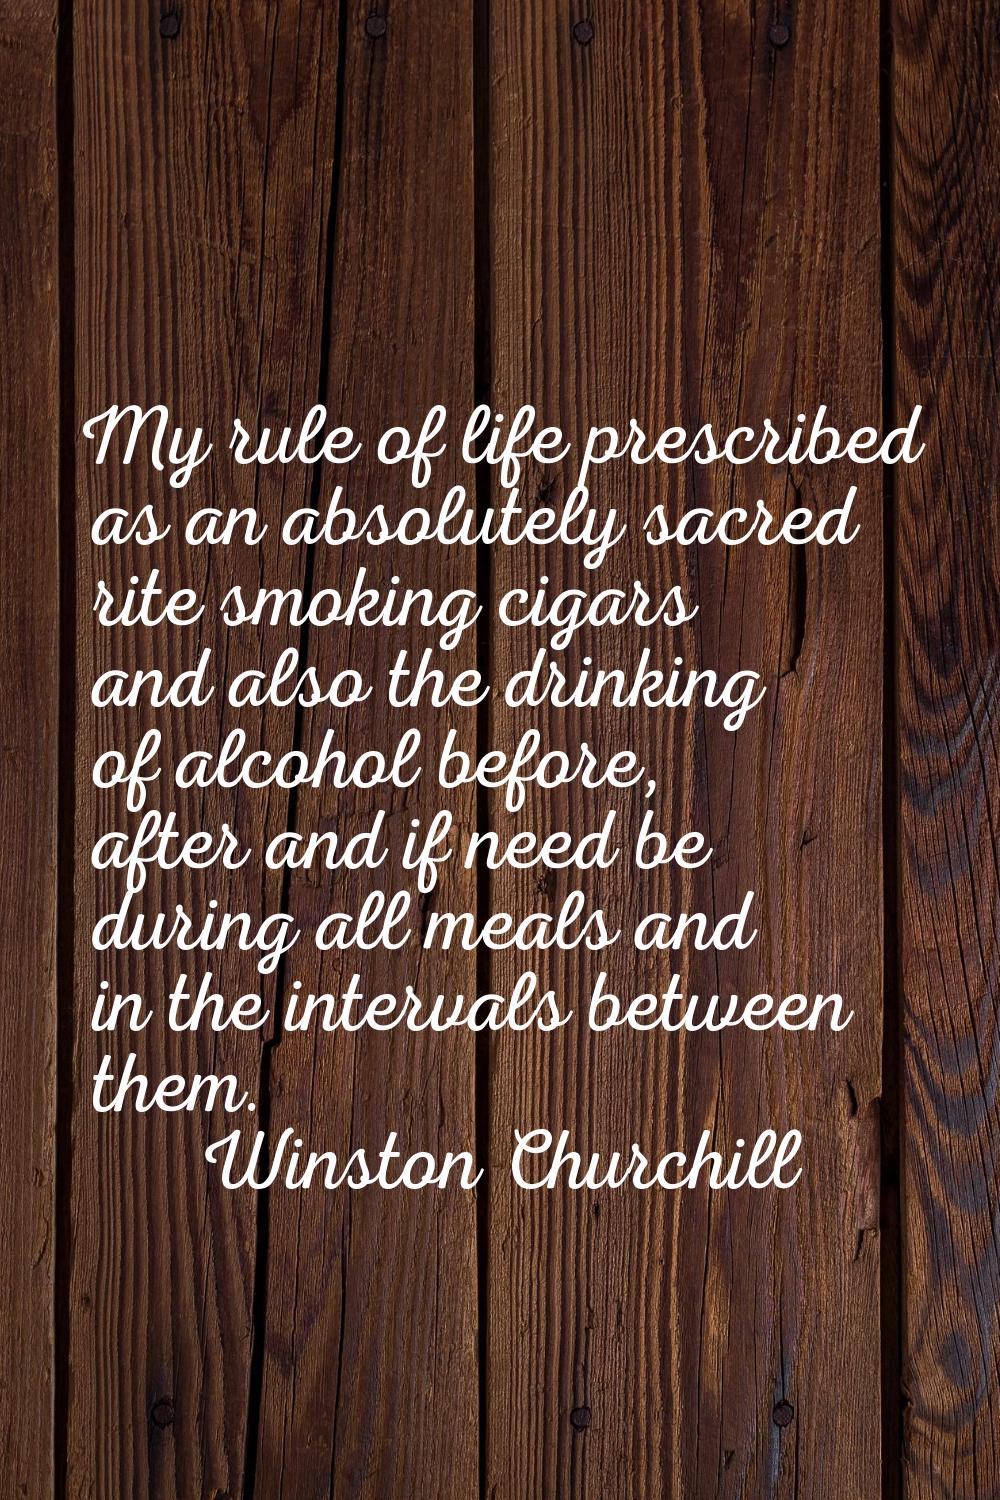 My rule of life prescribed as an absolutely sacred rite smoking cigars and also the drinking of alc